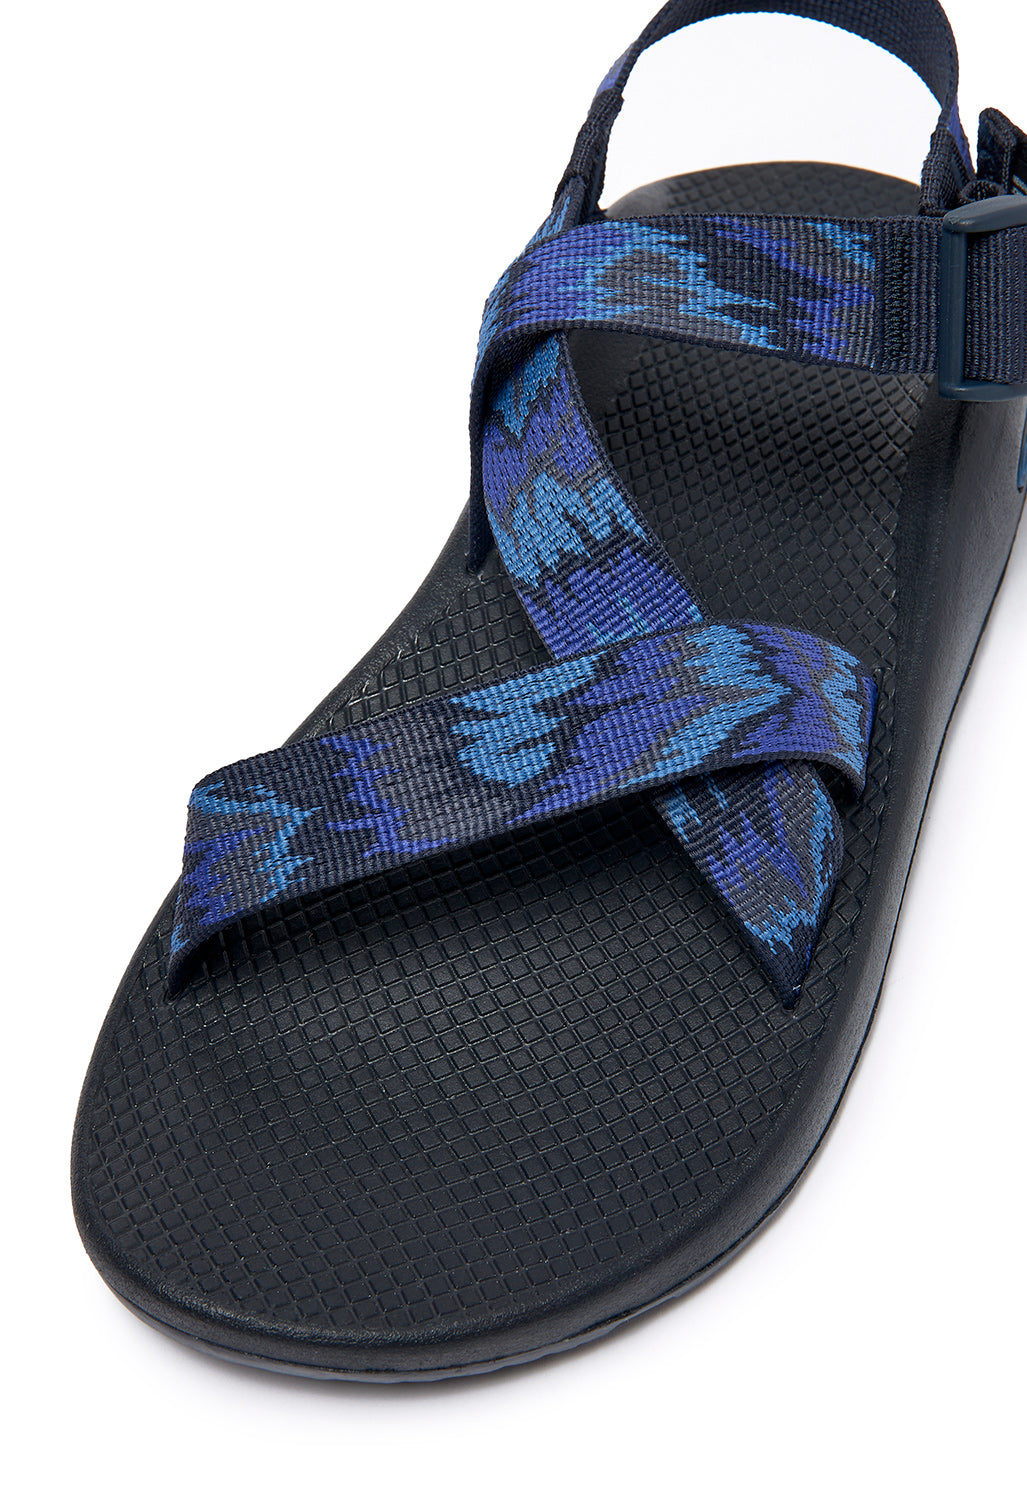 Chaco Men's Z1 Classic Sandals - Aerial Blue